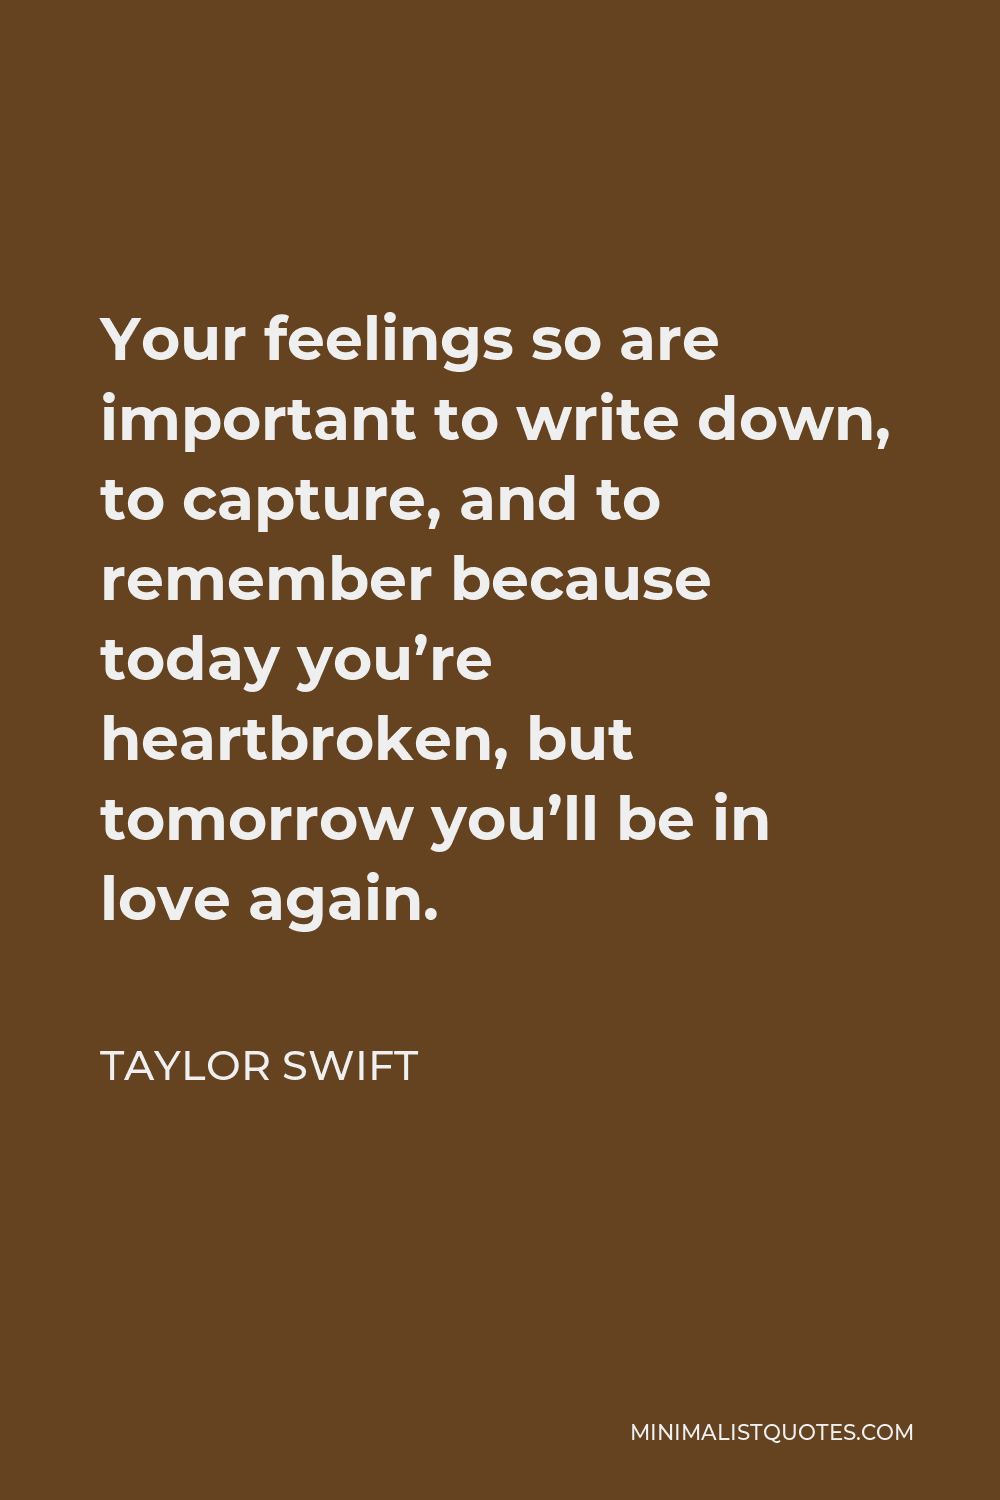 Taylor Swift Quote: Your feelings so are important to write down, to ...